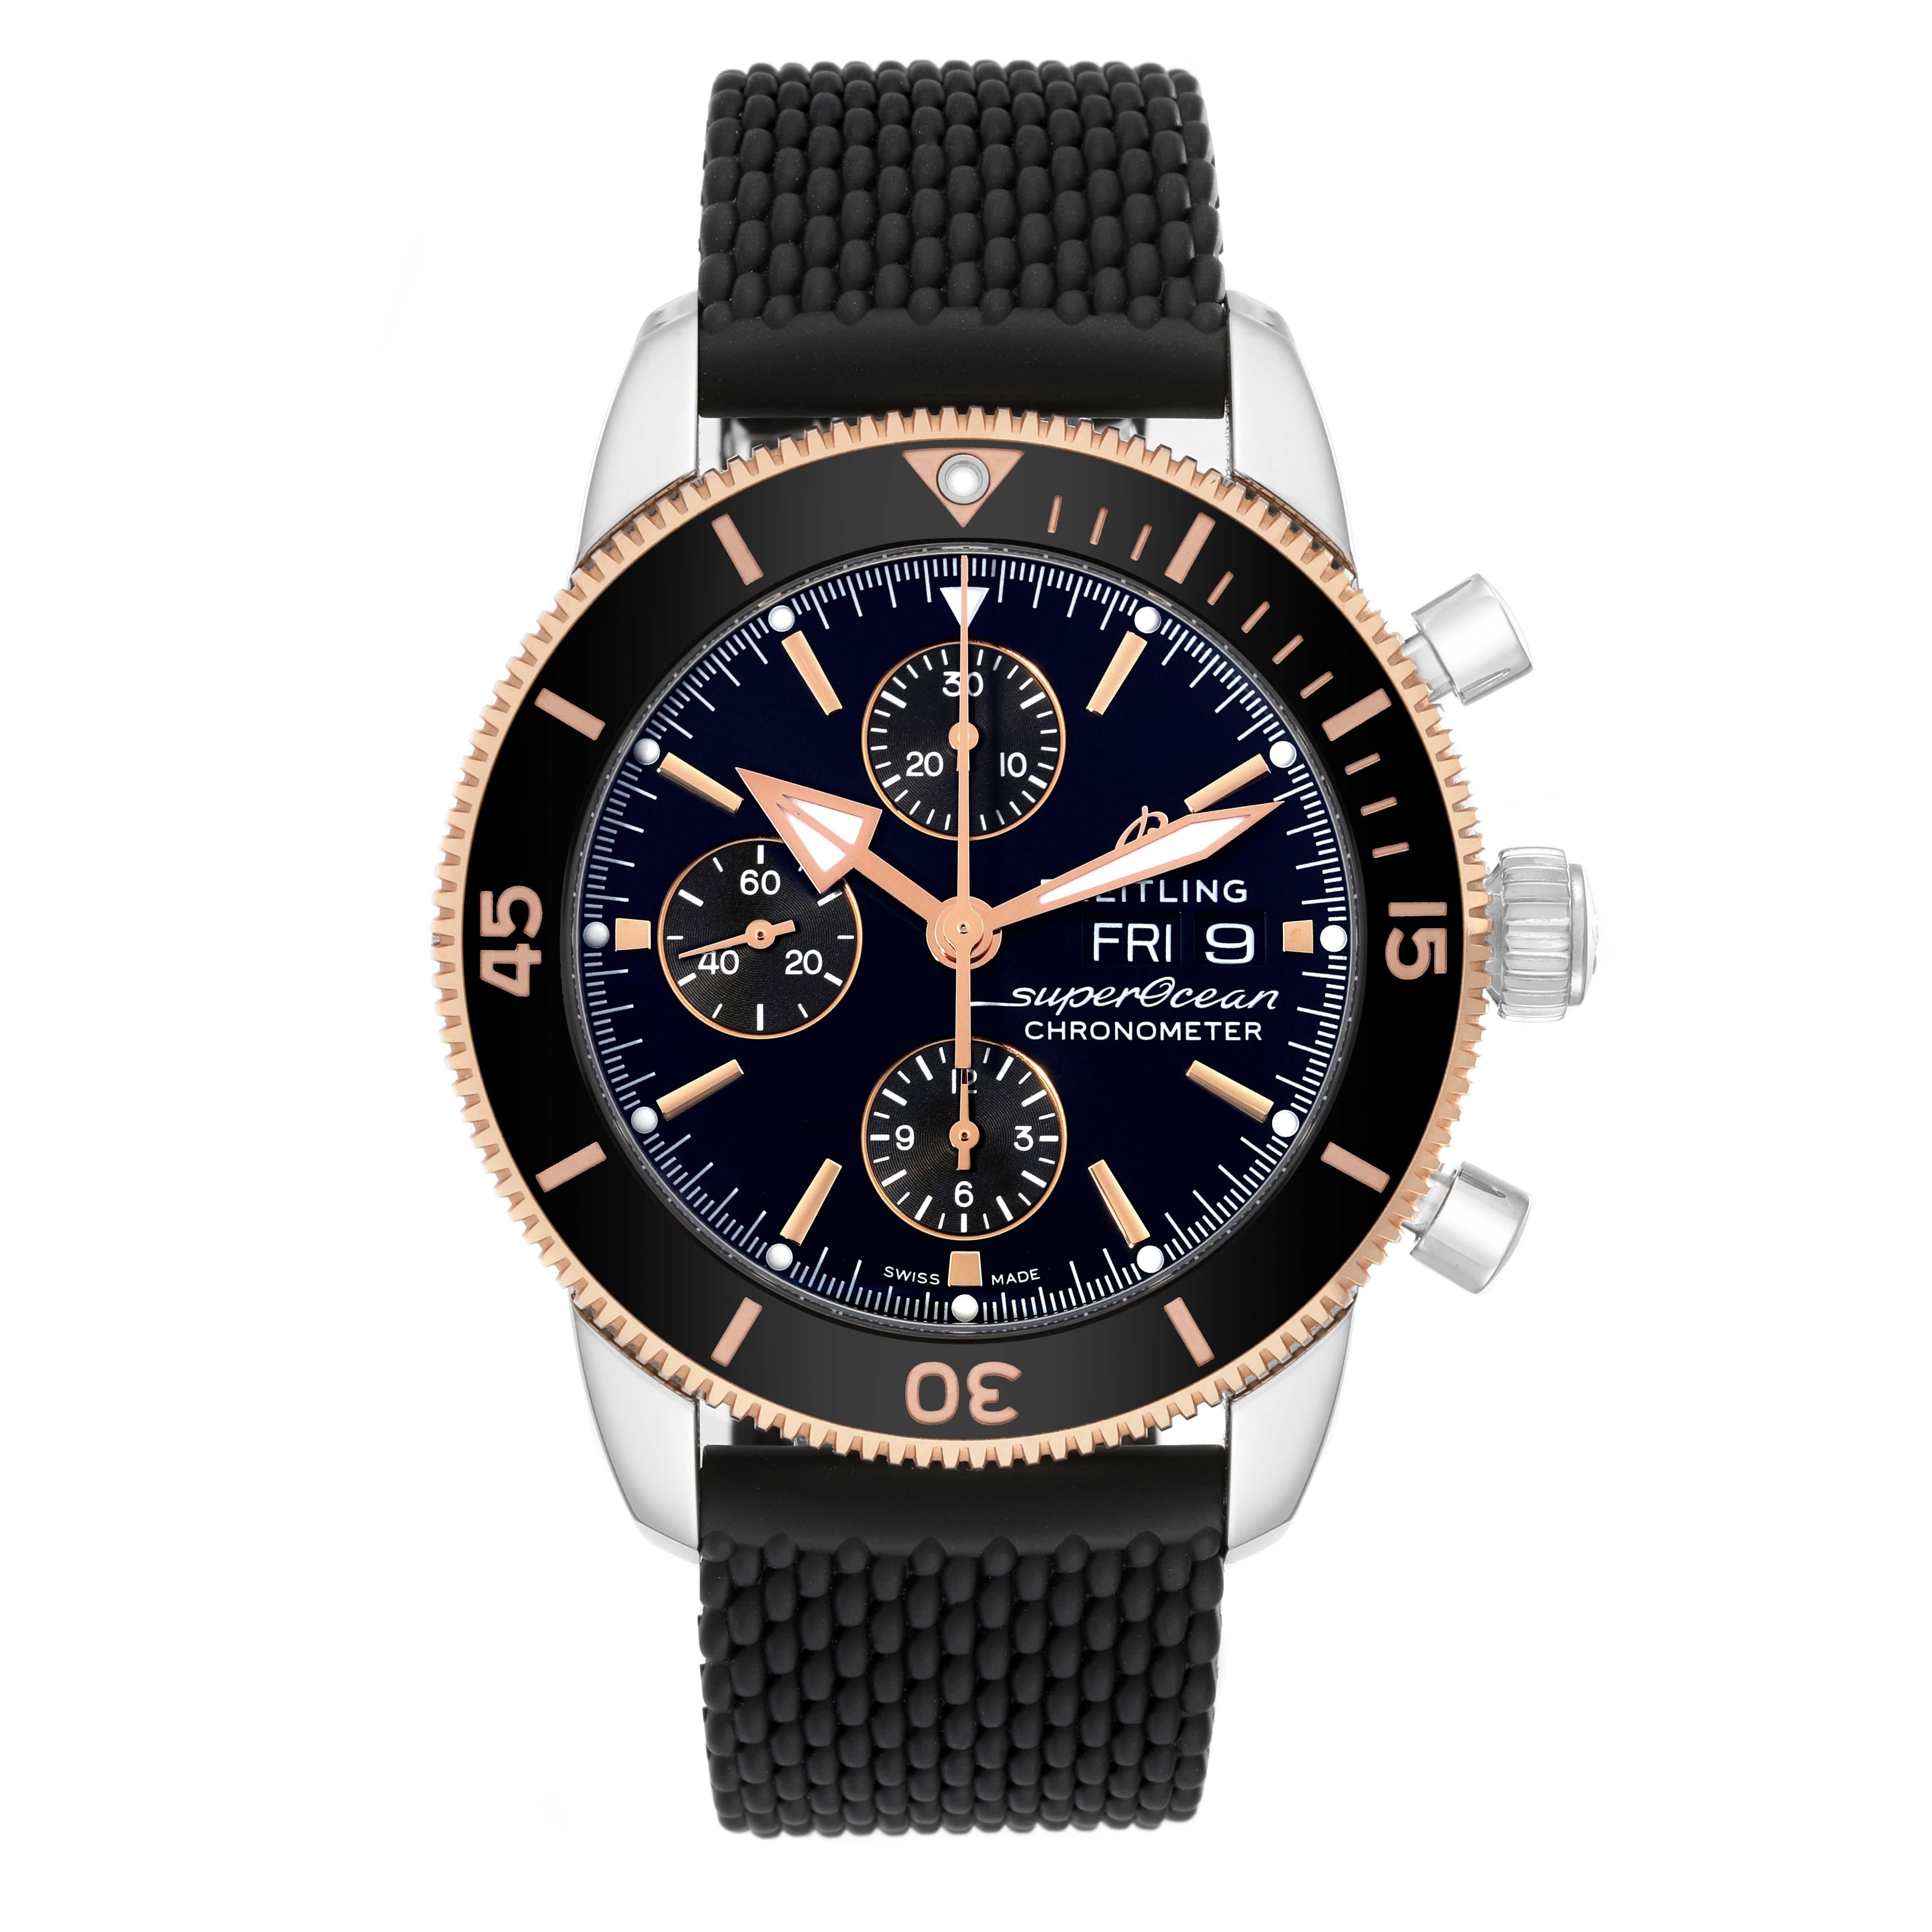 Breitling Superocean Heritage II Steel Rose Gold Mens Watch U13313 Box Card. Automatic self-winding chronograph movement. Stainless steel case 44.0 mm in diameter. 18K rose gold and black ceramic unidirectional revolving bezel. Scratch resistant